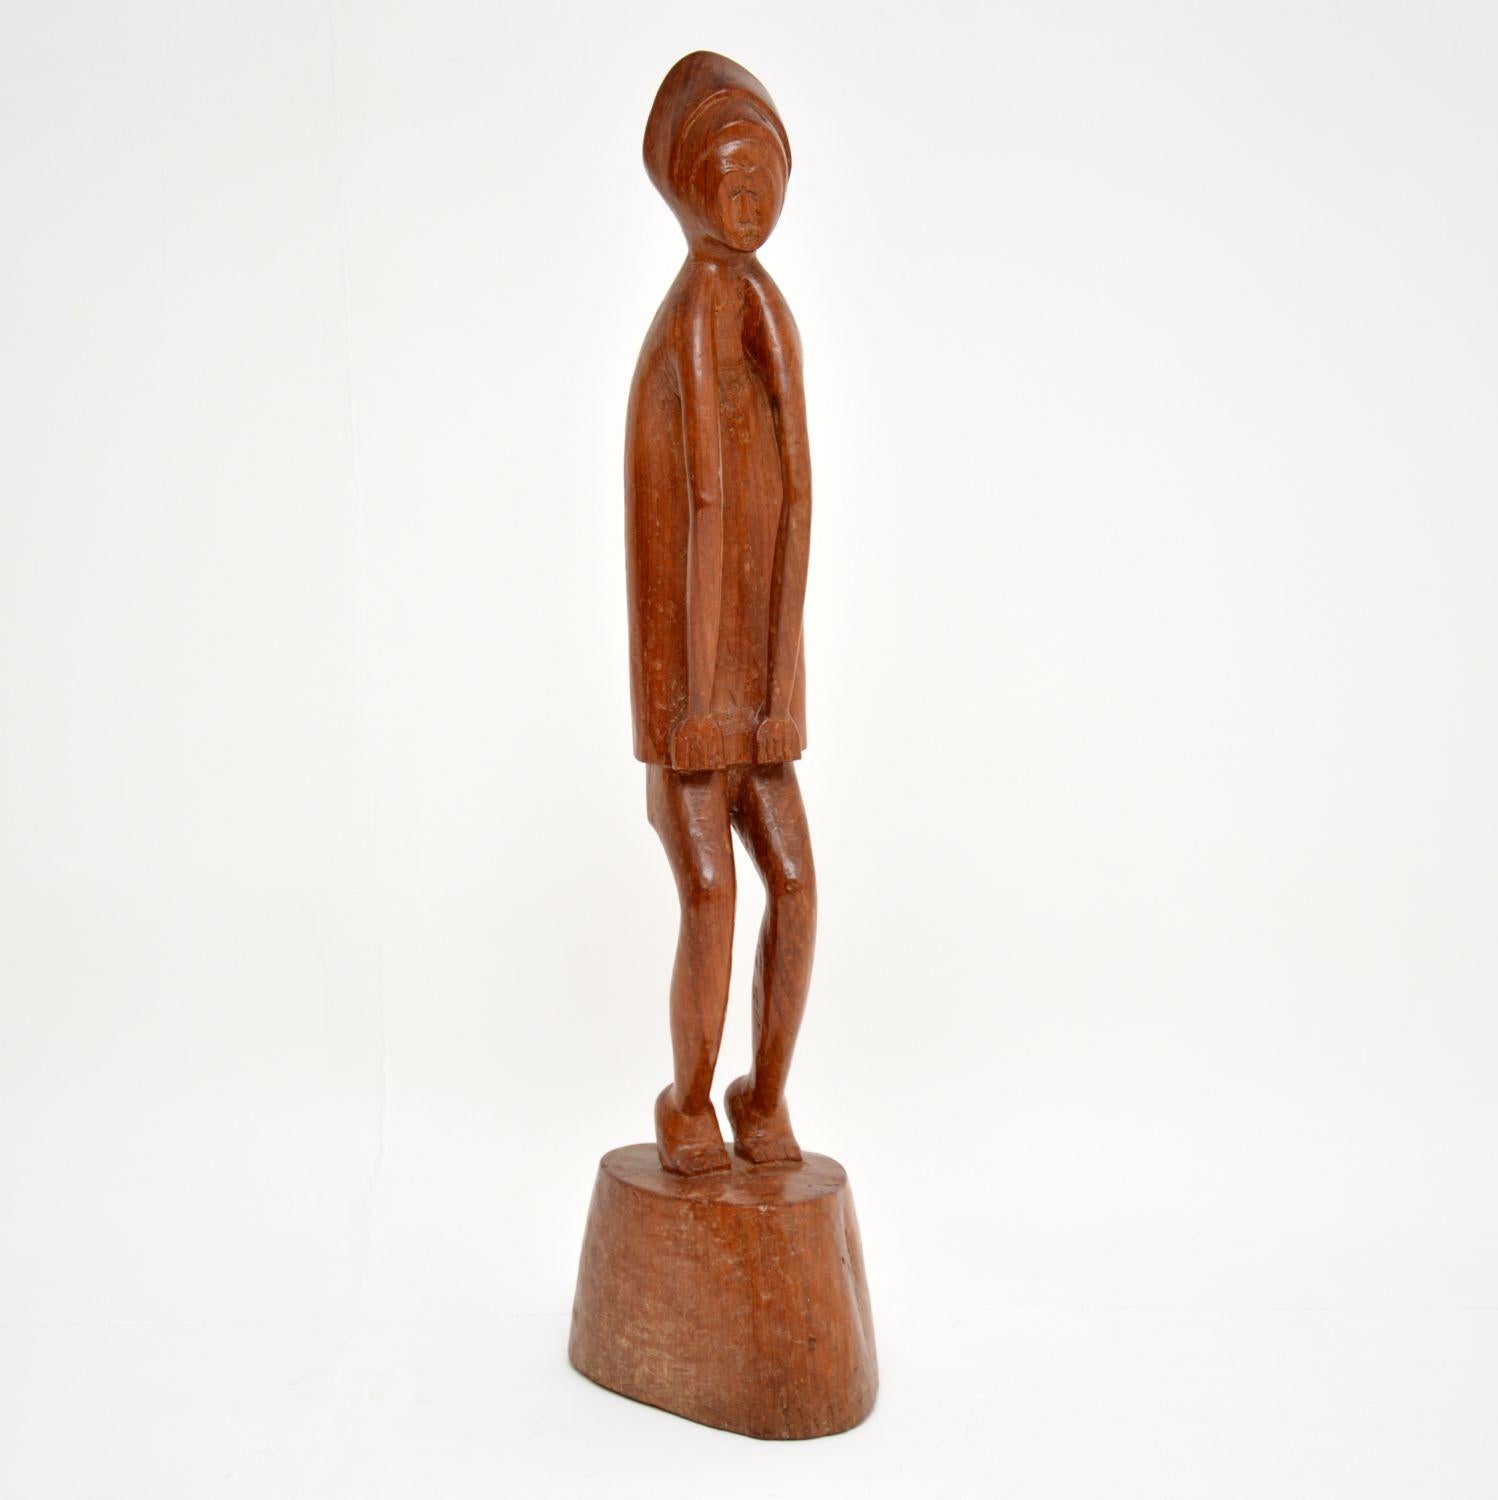 jamaican wood carvings for sale